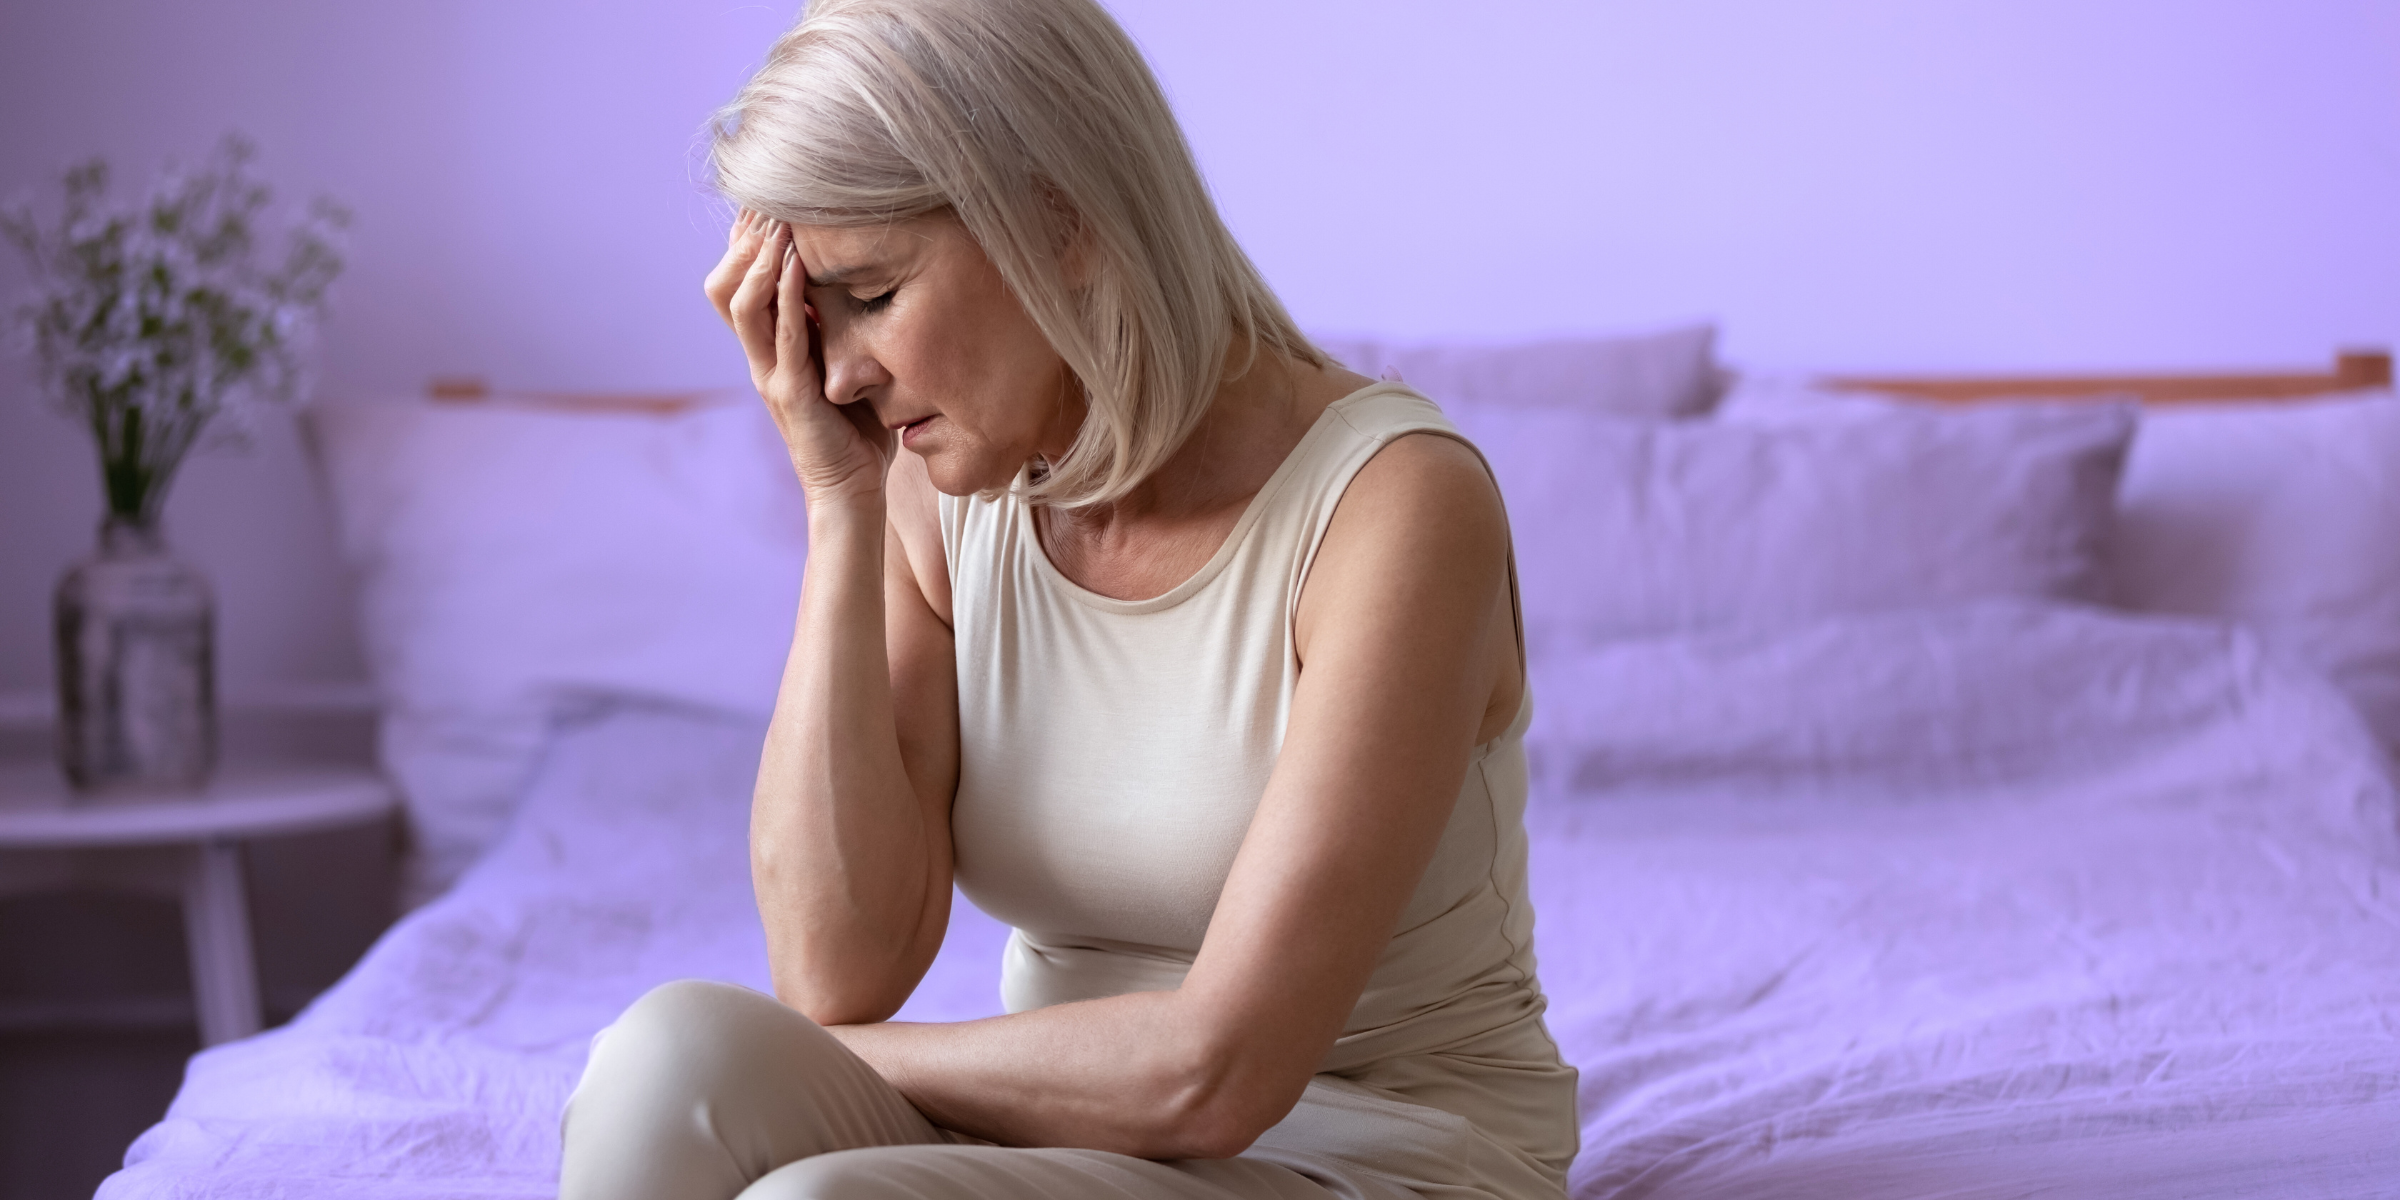 woman in purple bedroom upset with cognitive effects of aging